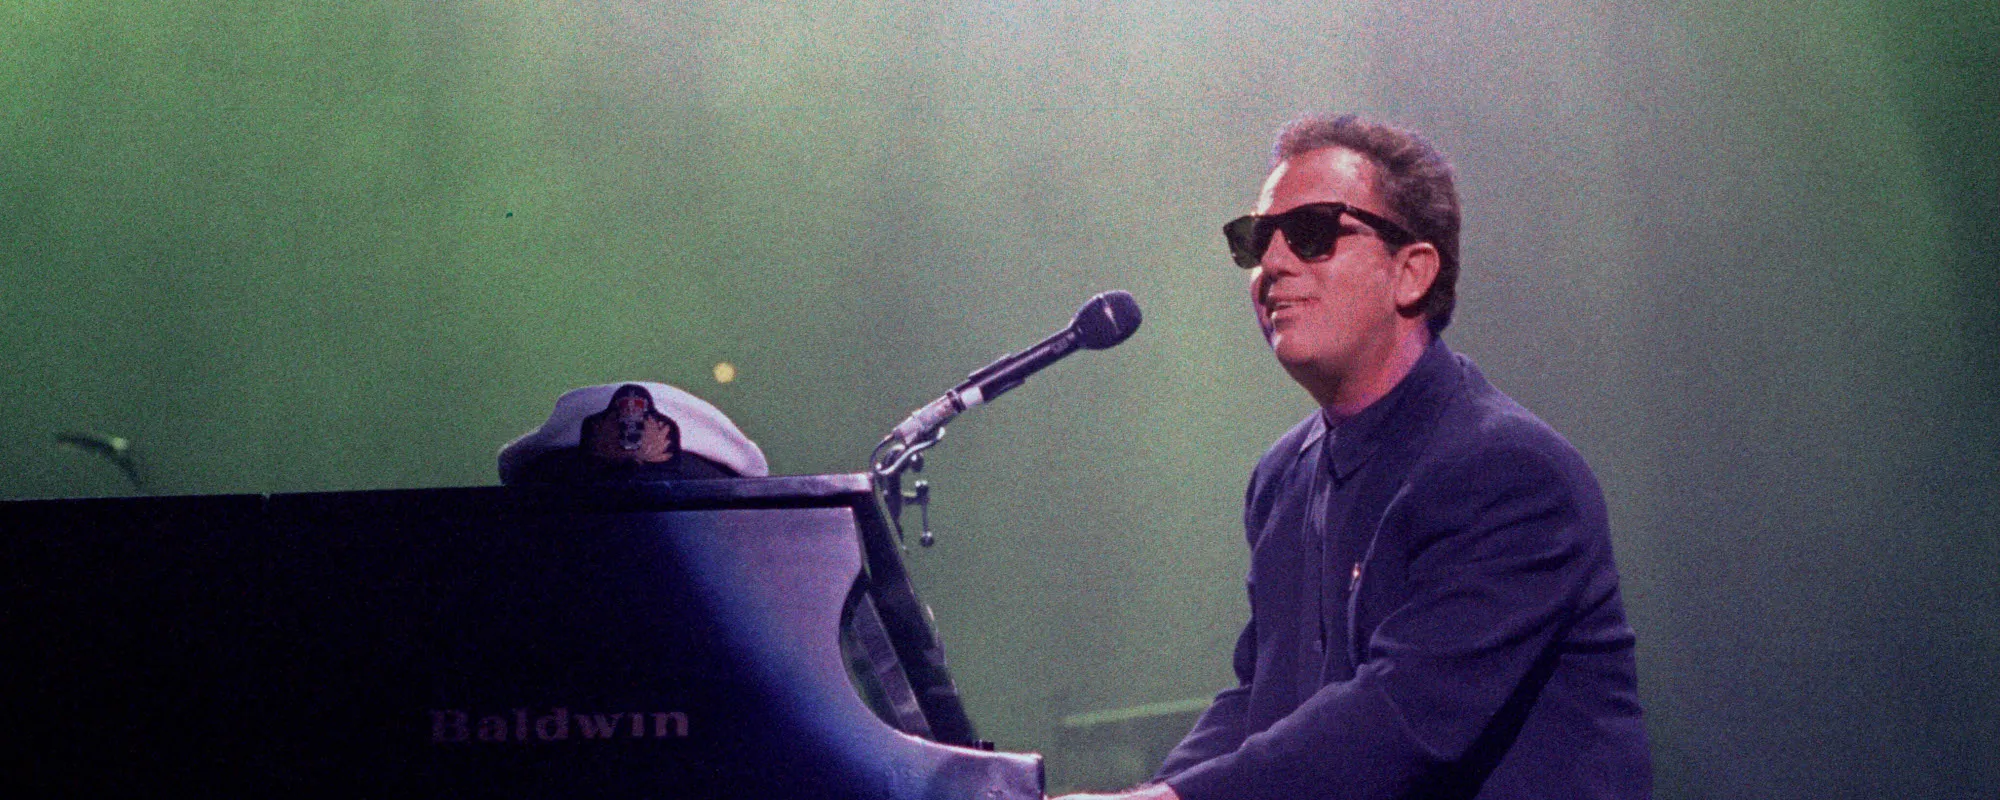 The Empowering Meaning Behind Billy Joel’s “She’s Always a Woman”